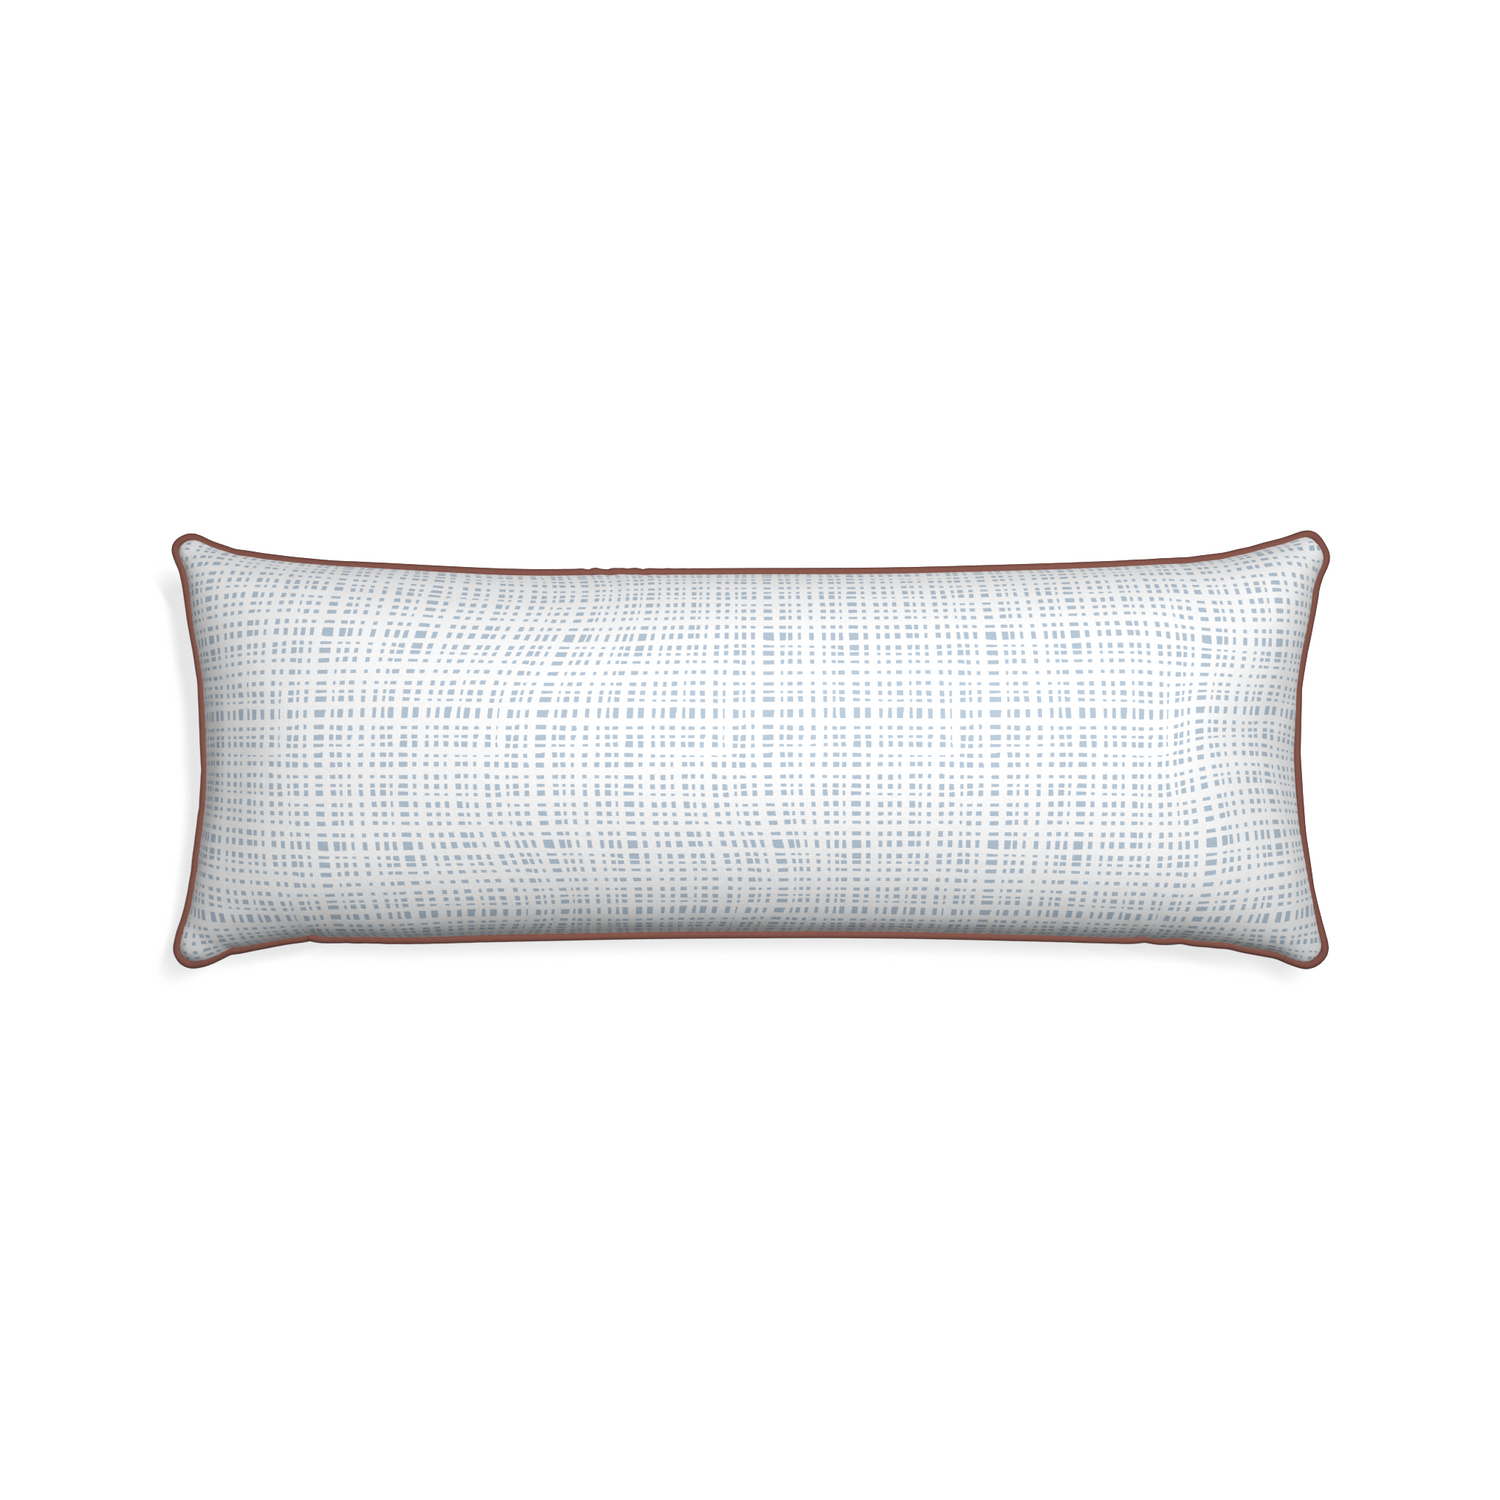 Xl-lumbar ginger custom plaid sky bluepillow with w piping on white background